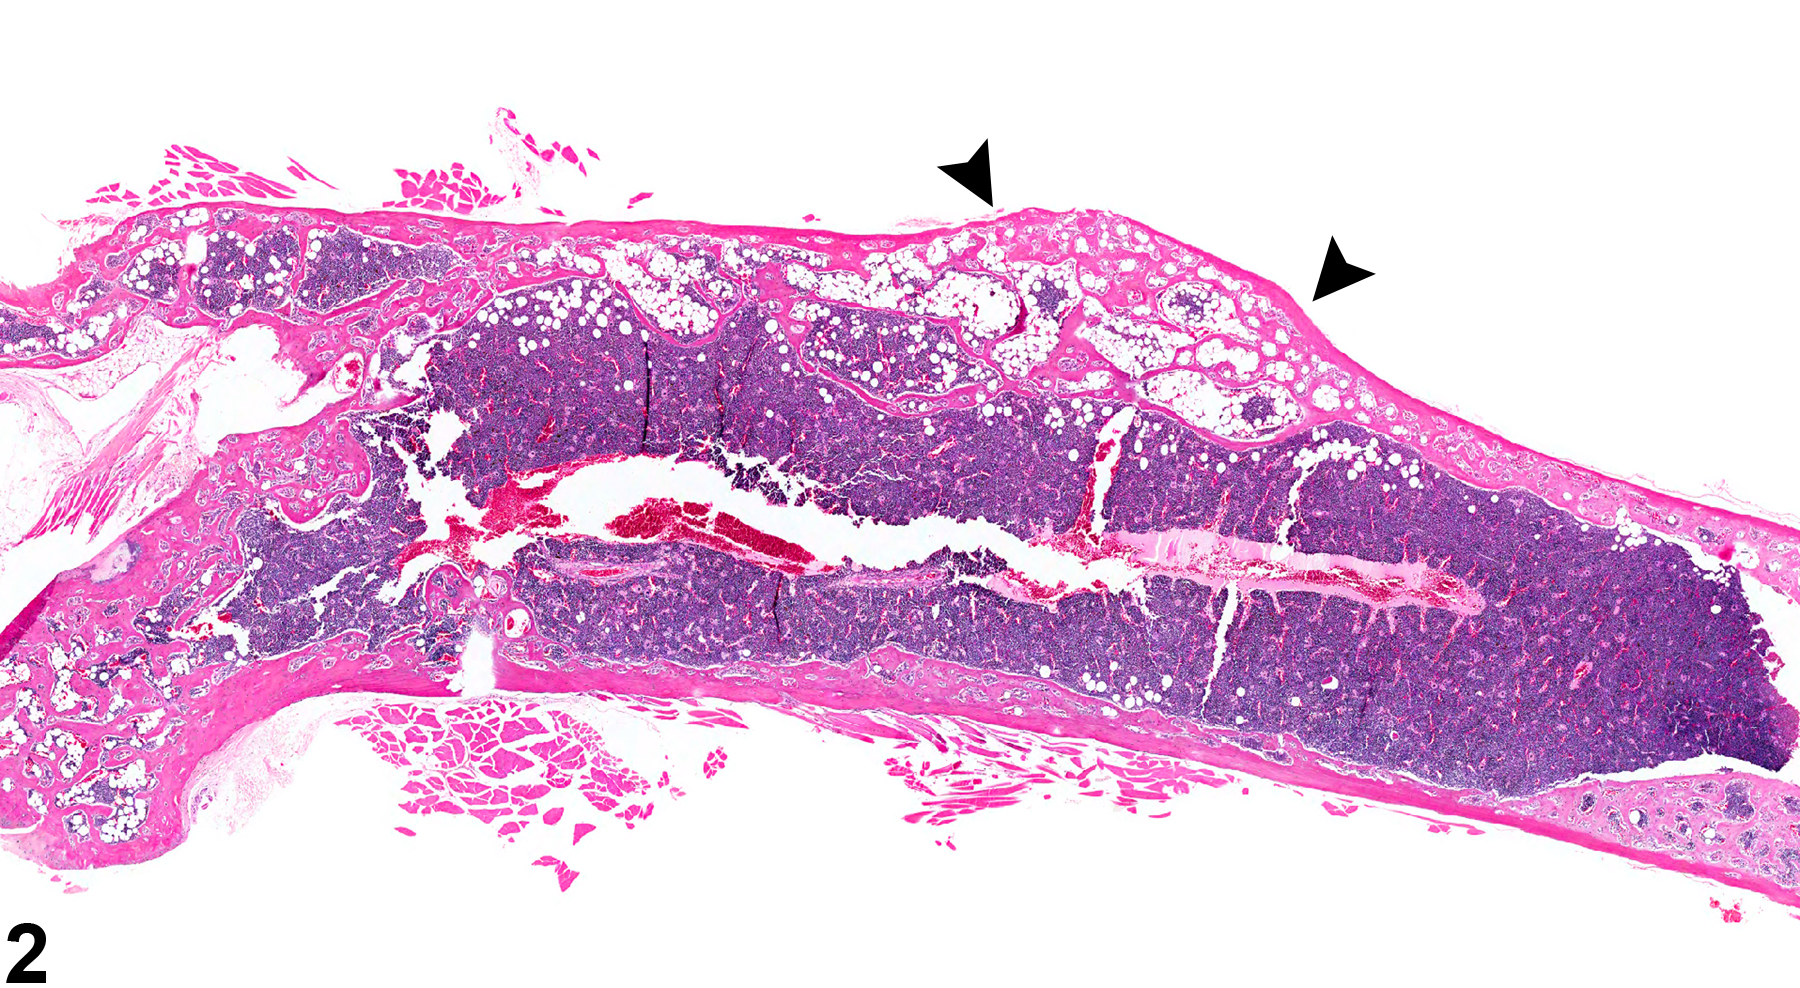 Image of decreased bone in the bone from a female B6C3F1/N mouse in a chronic study